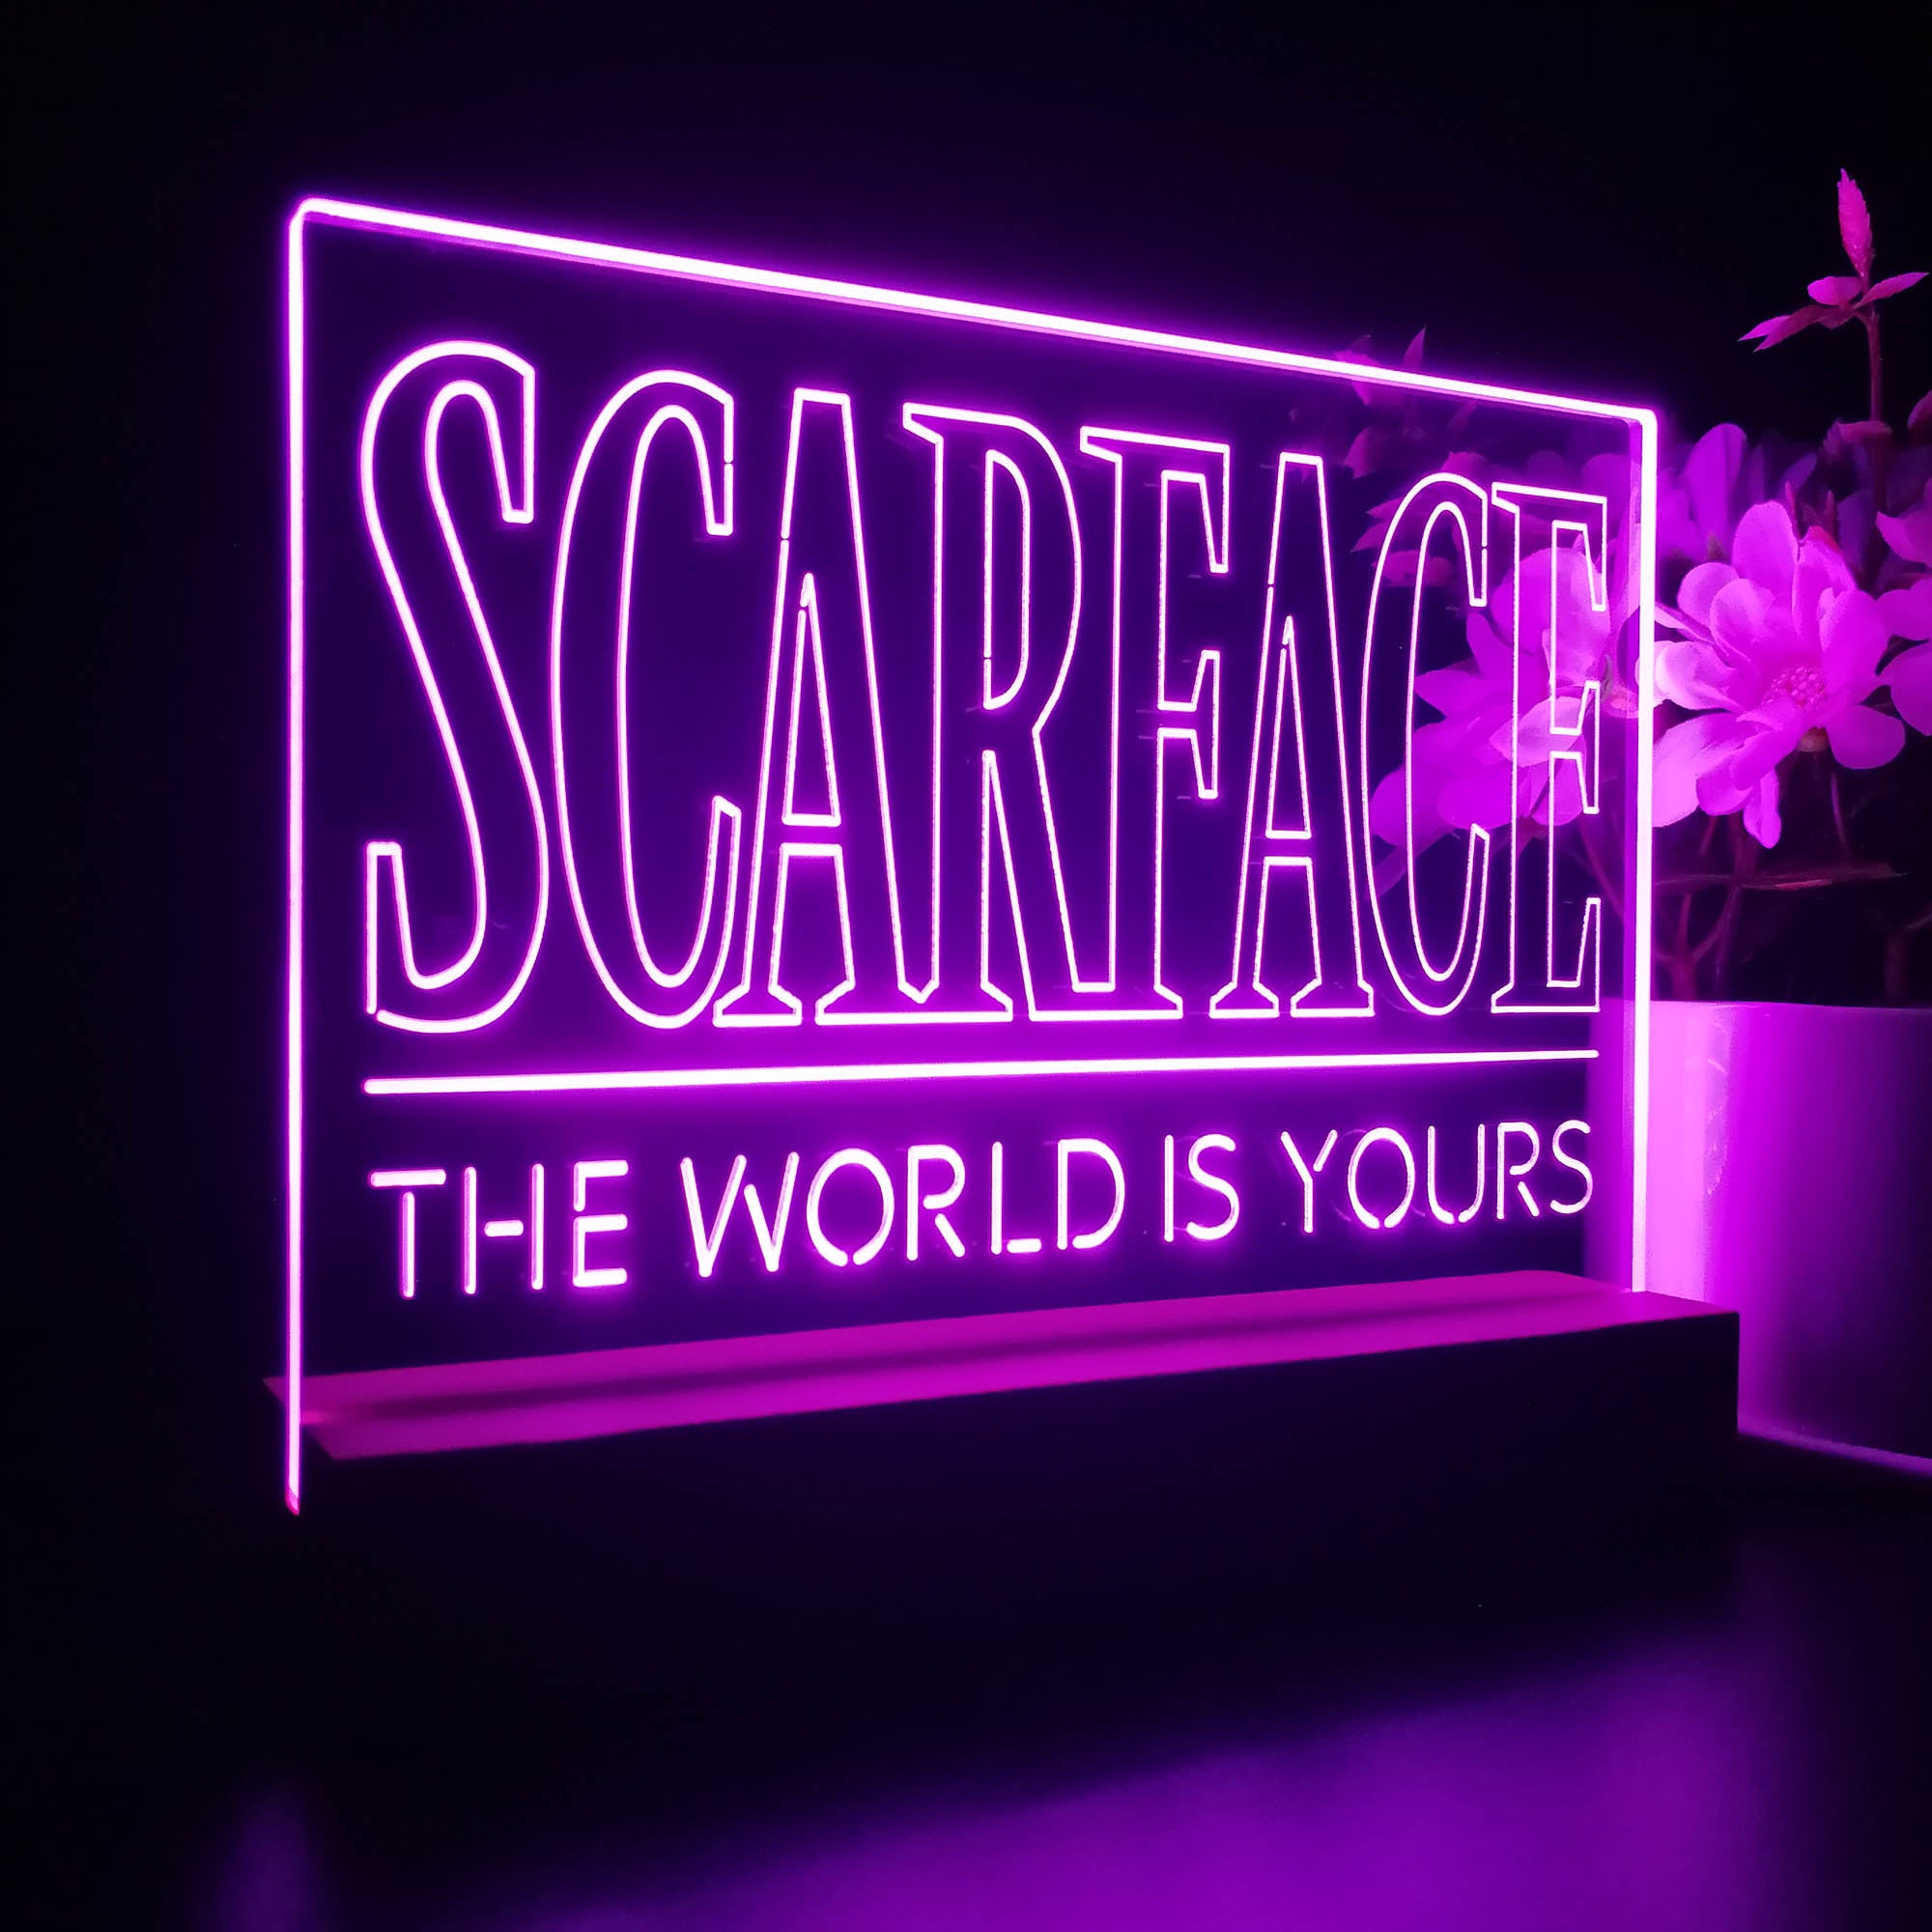 Scarface The World is Yours 3D LED Illusion Night Light